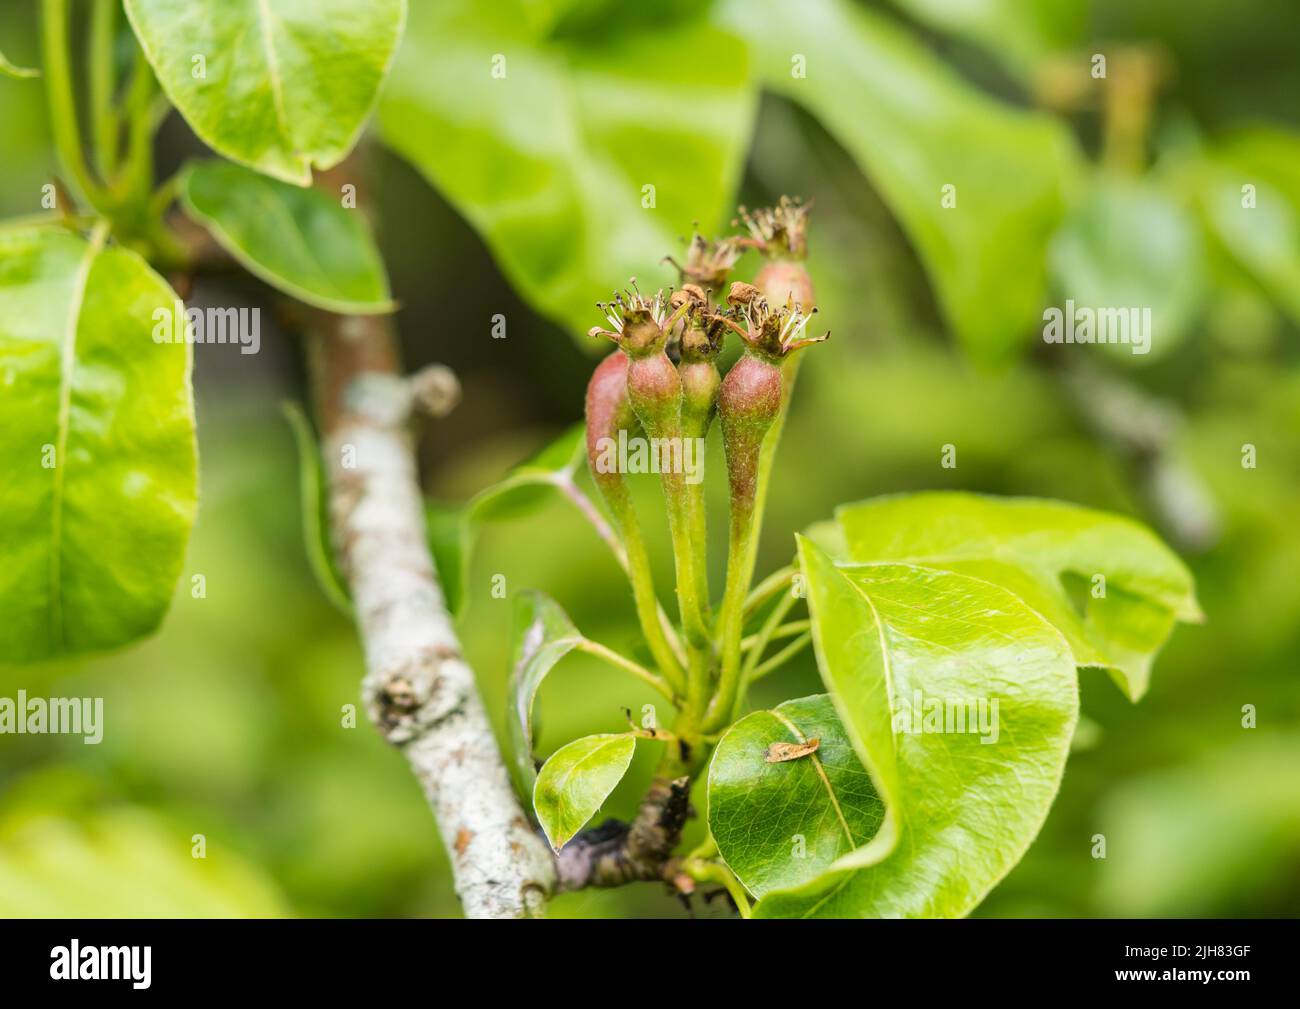 A macro shot of some pears beginning to form within the branches of a pear tree. Stock Photo